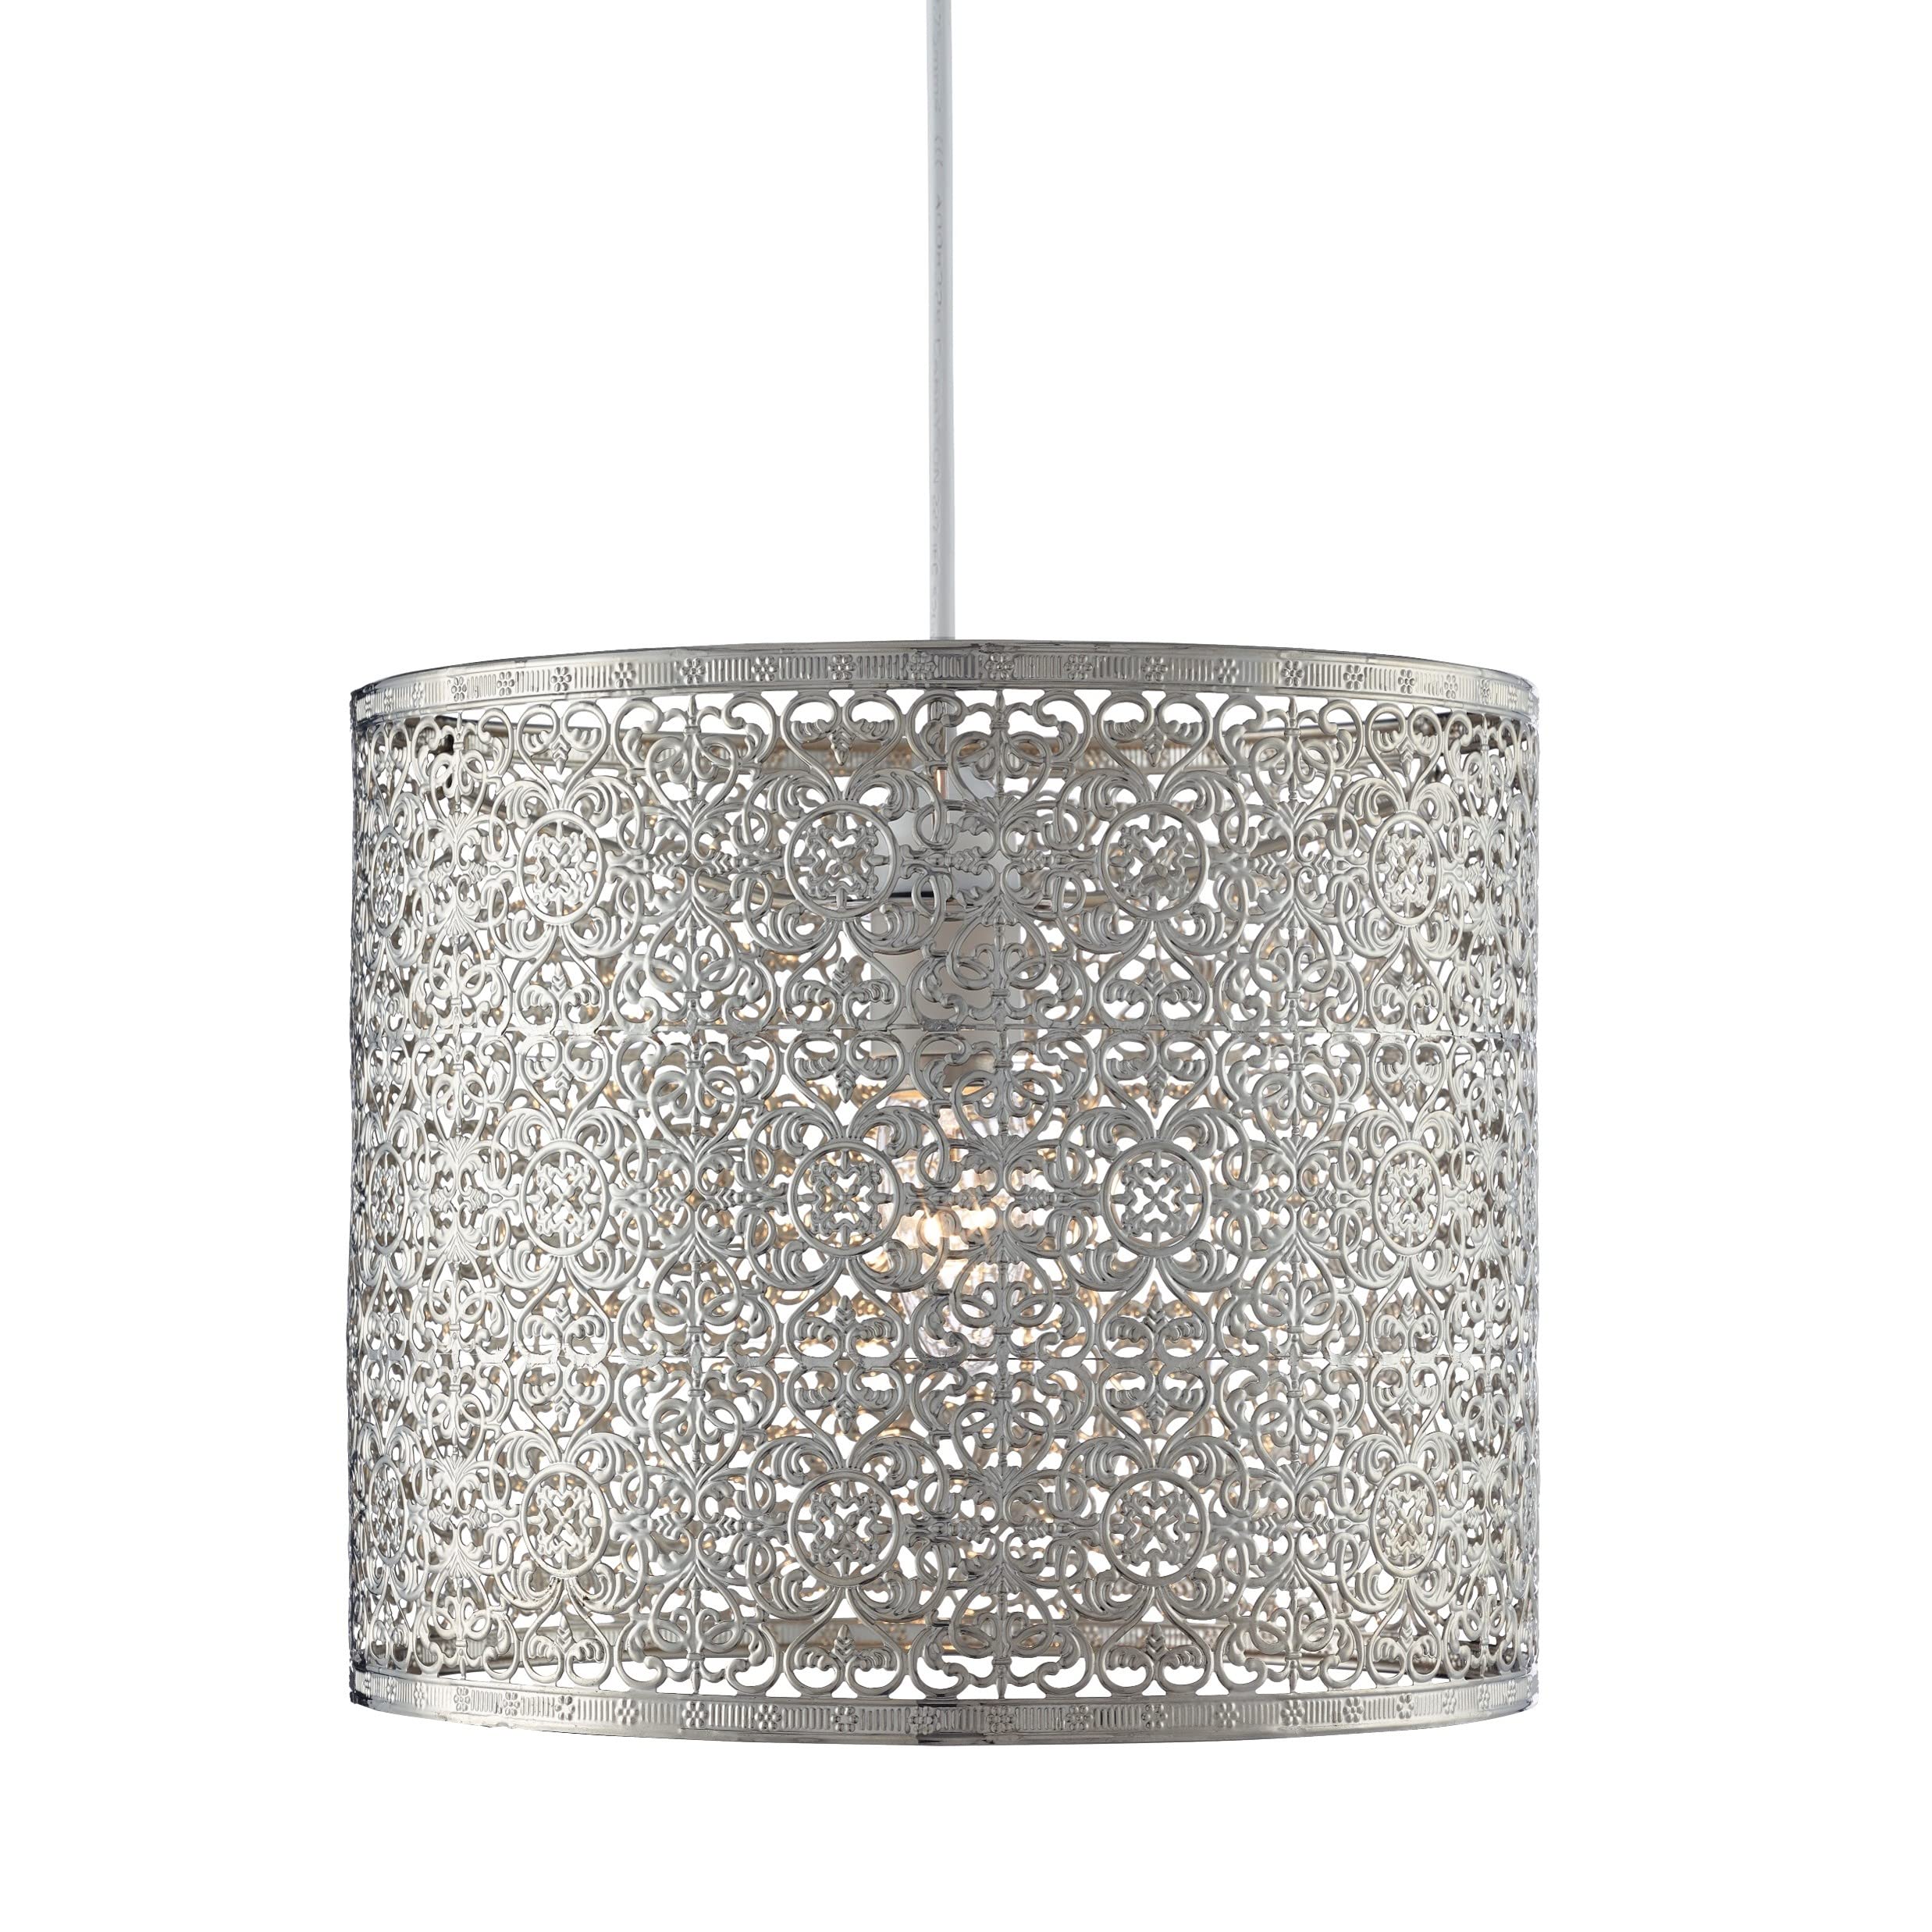 Lighting Collection 700035 Moroccan Style Metal Easy Fit Pendant with Intricate Pattern, Silver Chrome